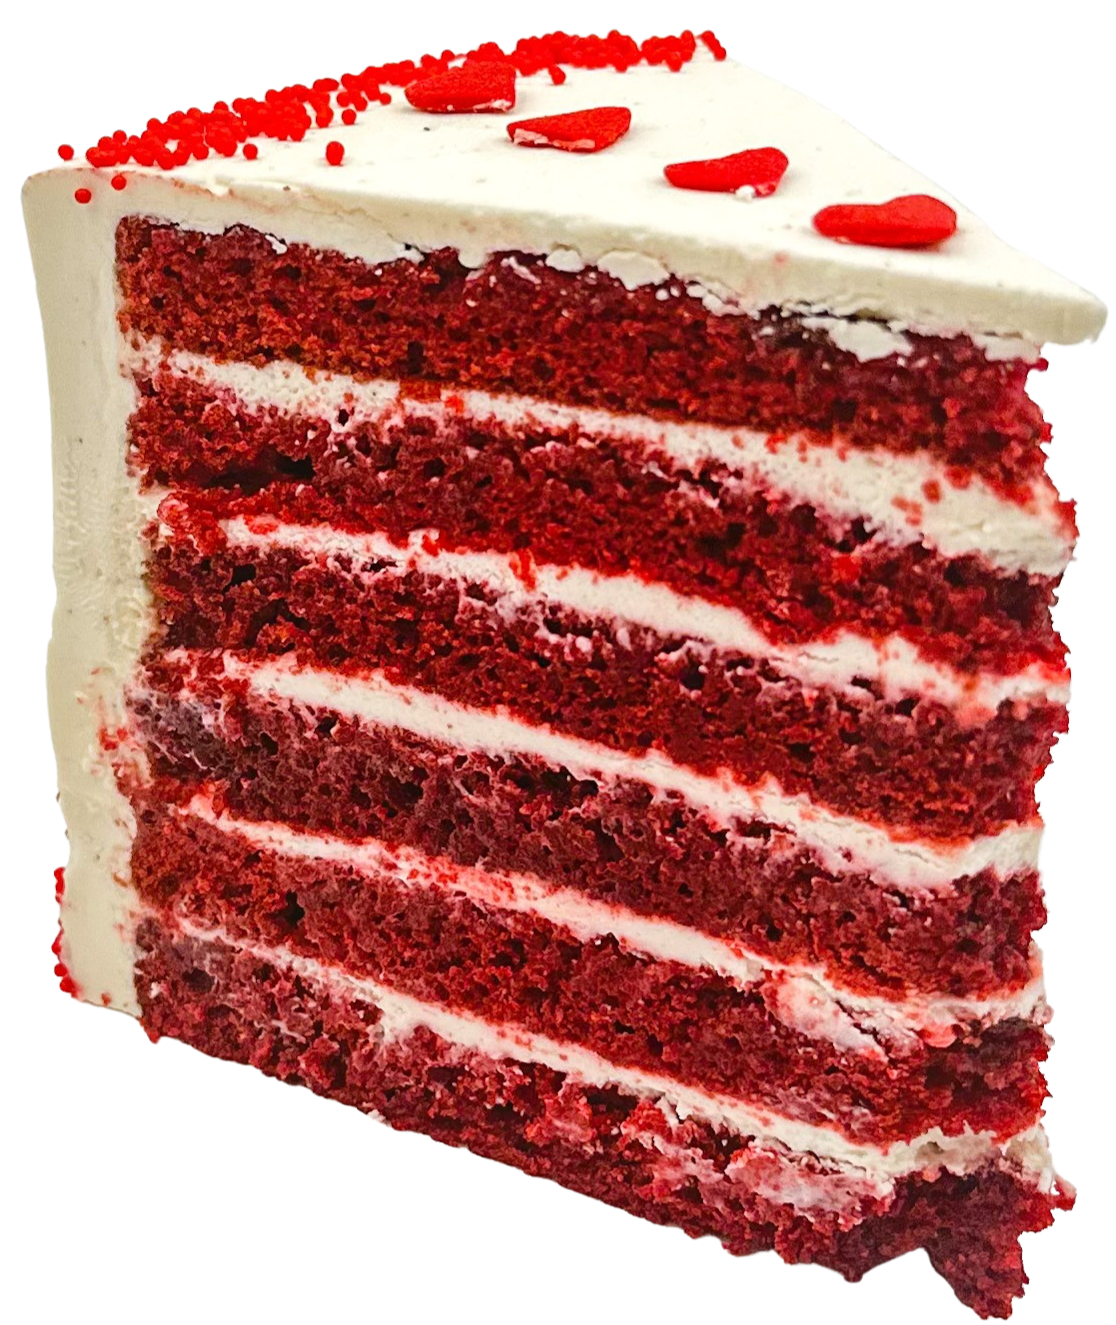 White Velvet Cake. Delicious & moist with a beautifully light texture.